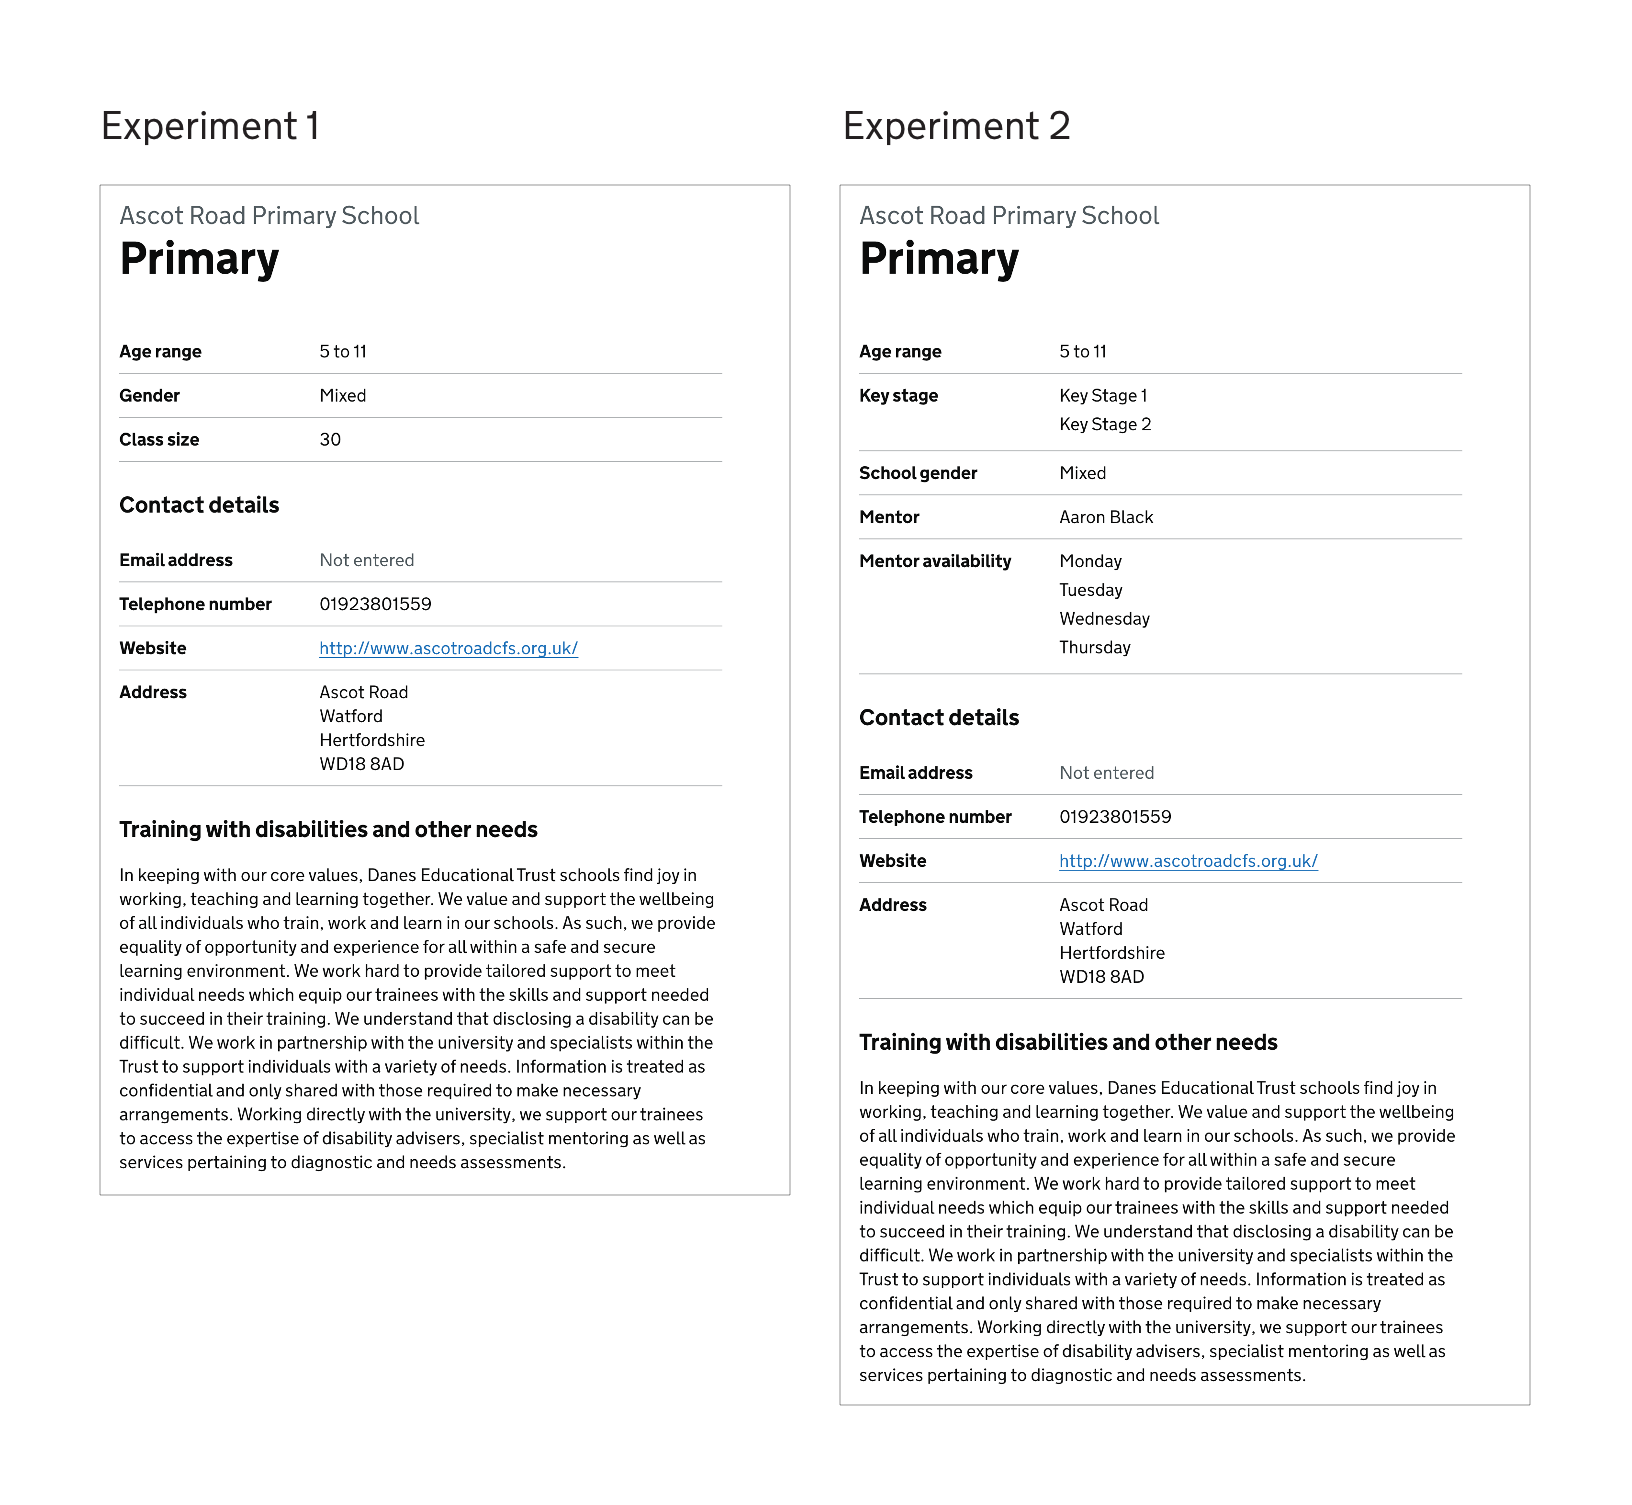 Image showing the change in the details page content and layout between experiments 1 and 2